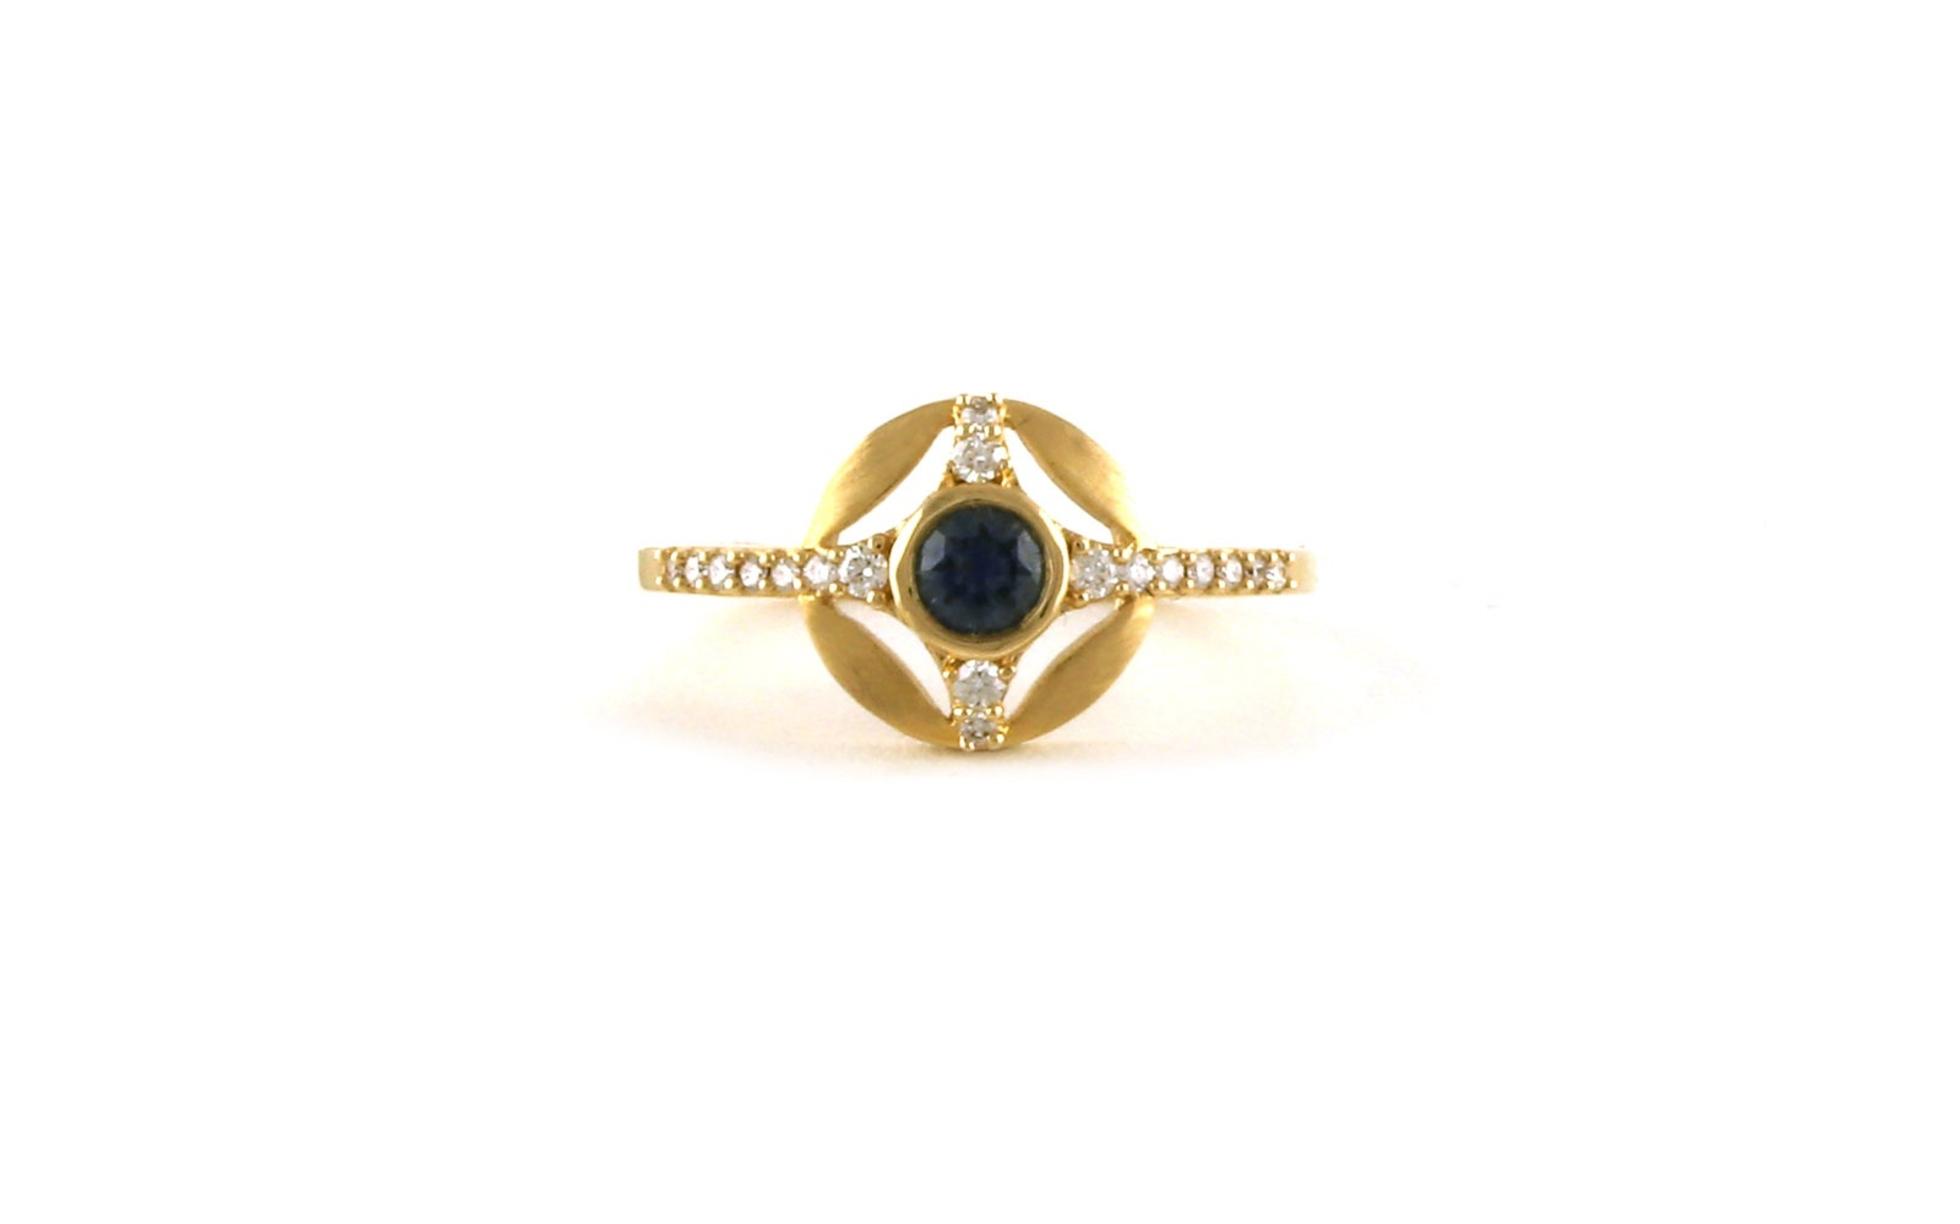 4-Point Star Bezel-set Montana Sapphire and Diamond Ring with Satin Finish in Yellow Gold (0.44cts TWT)